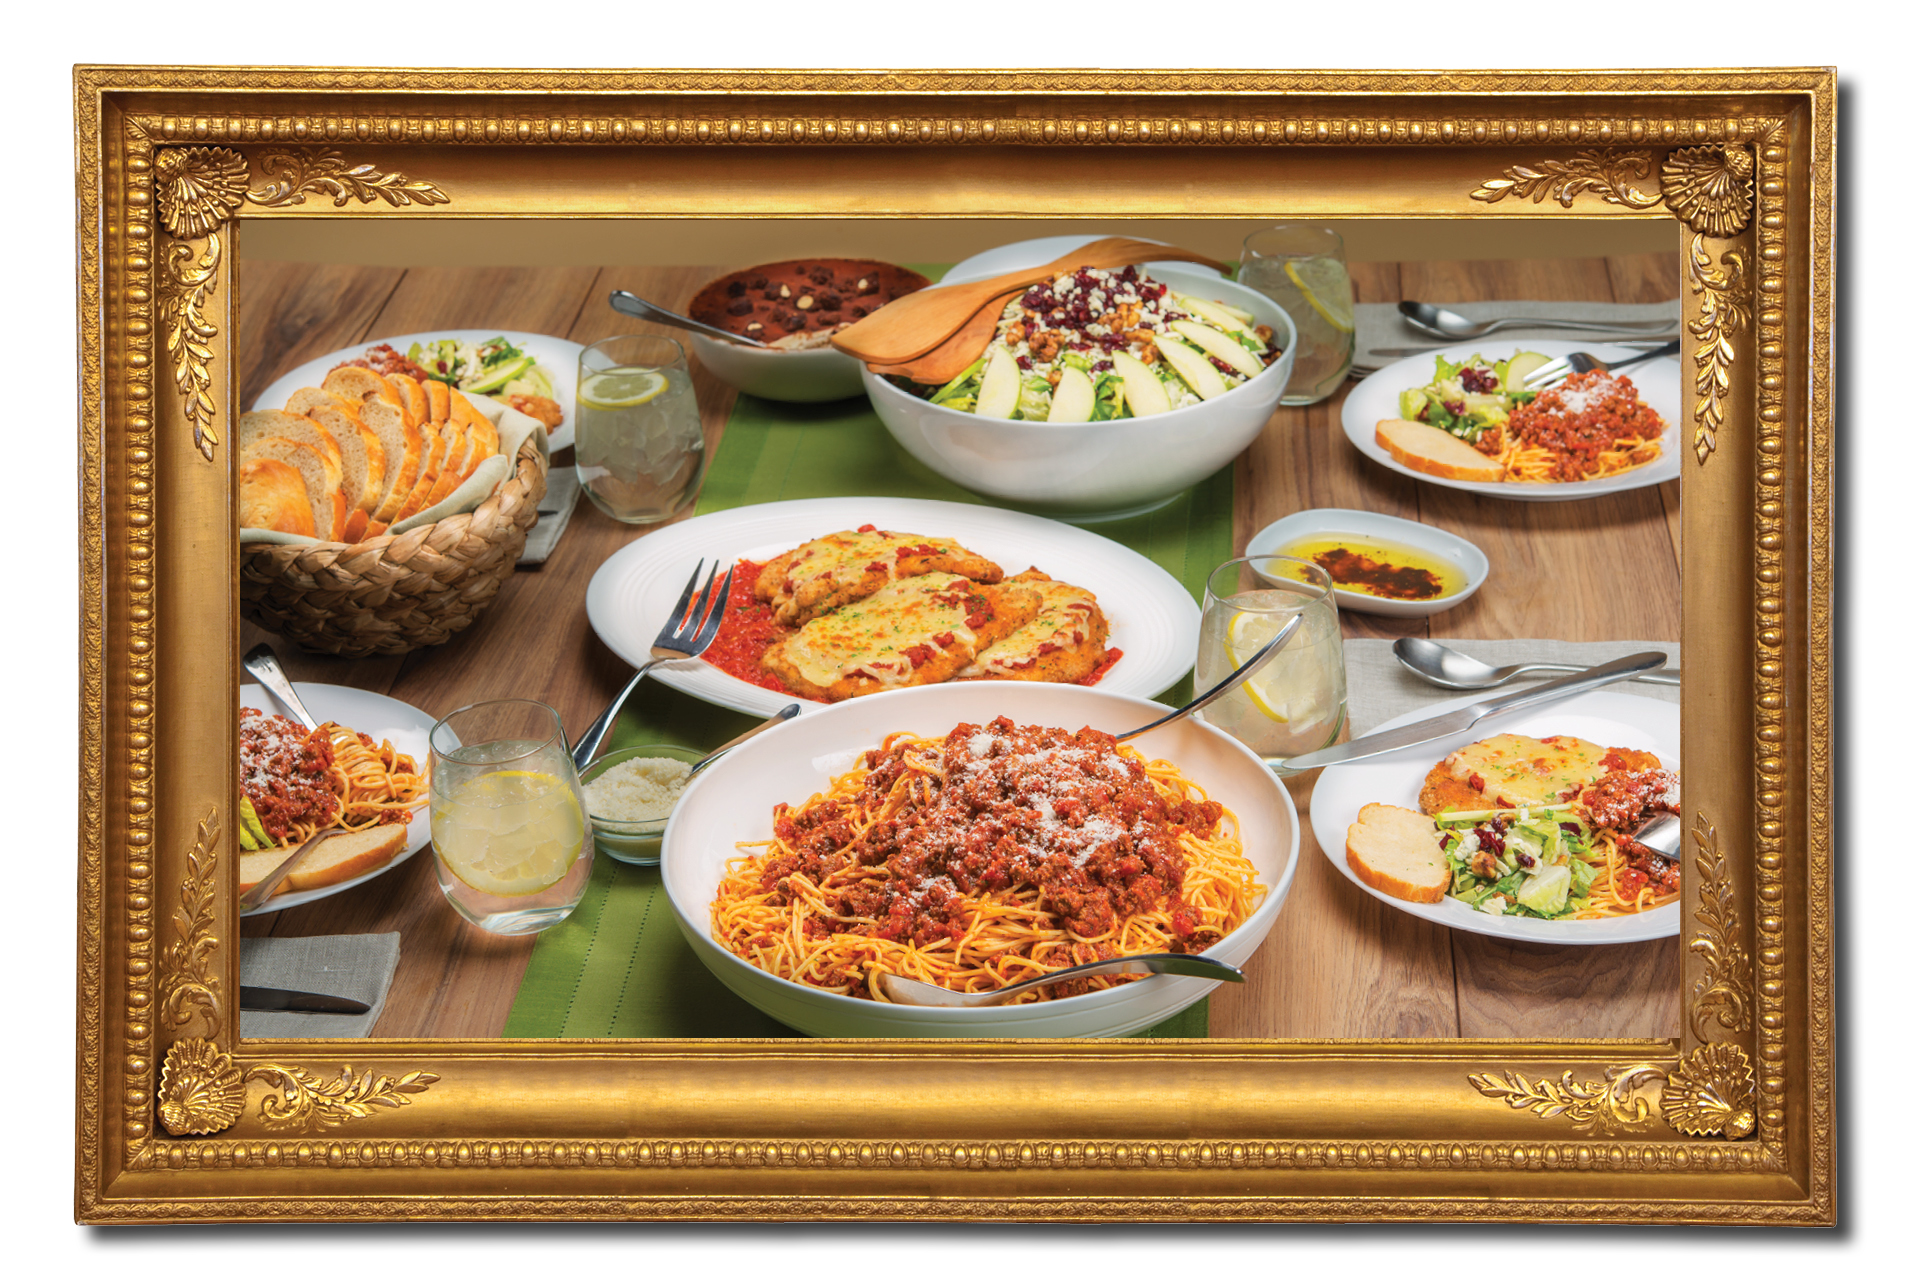 A spread of Buca dishes for Mother's Day